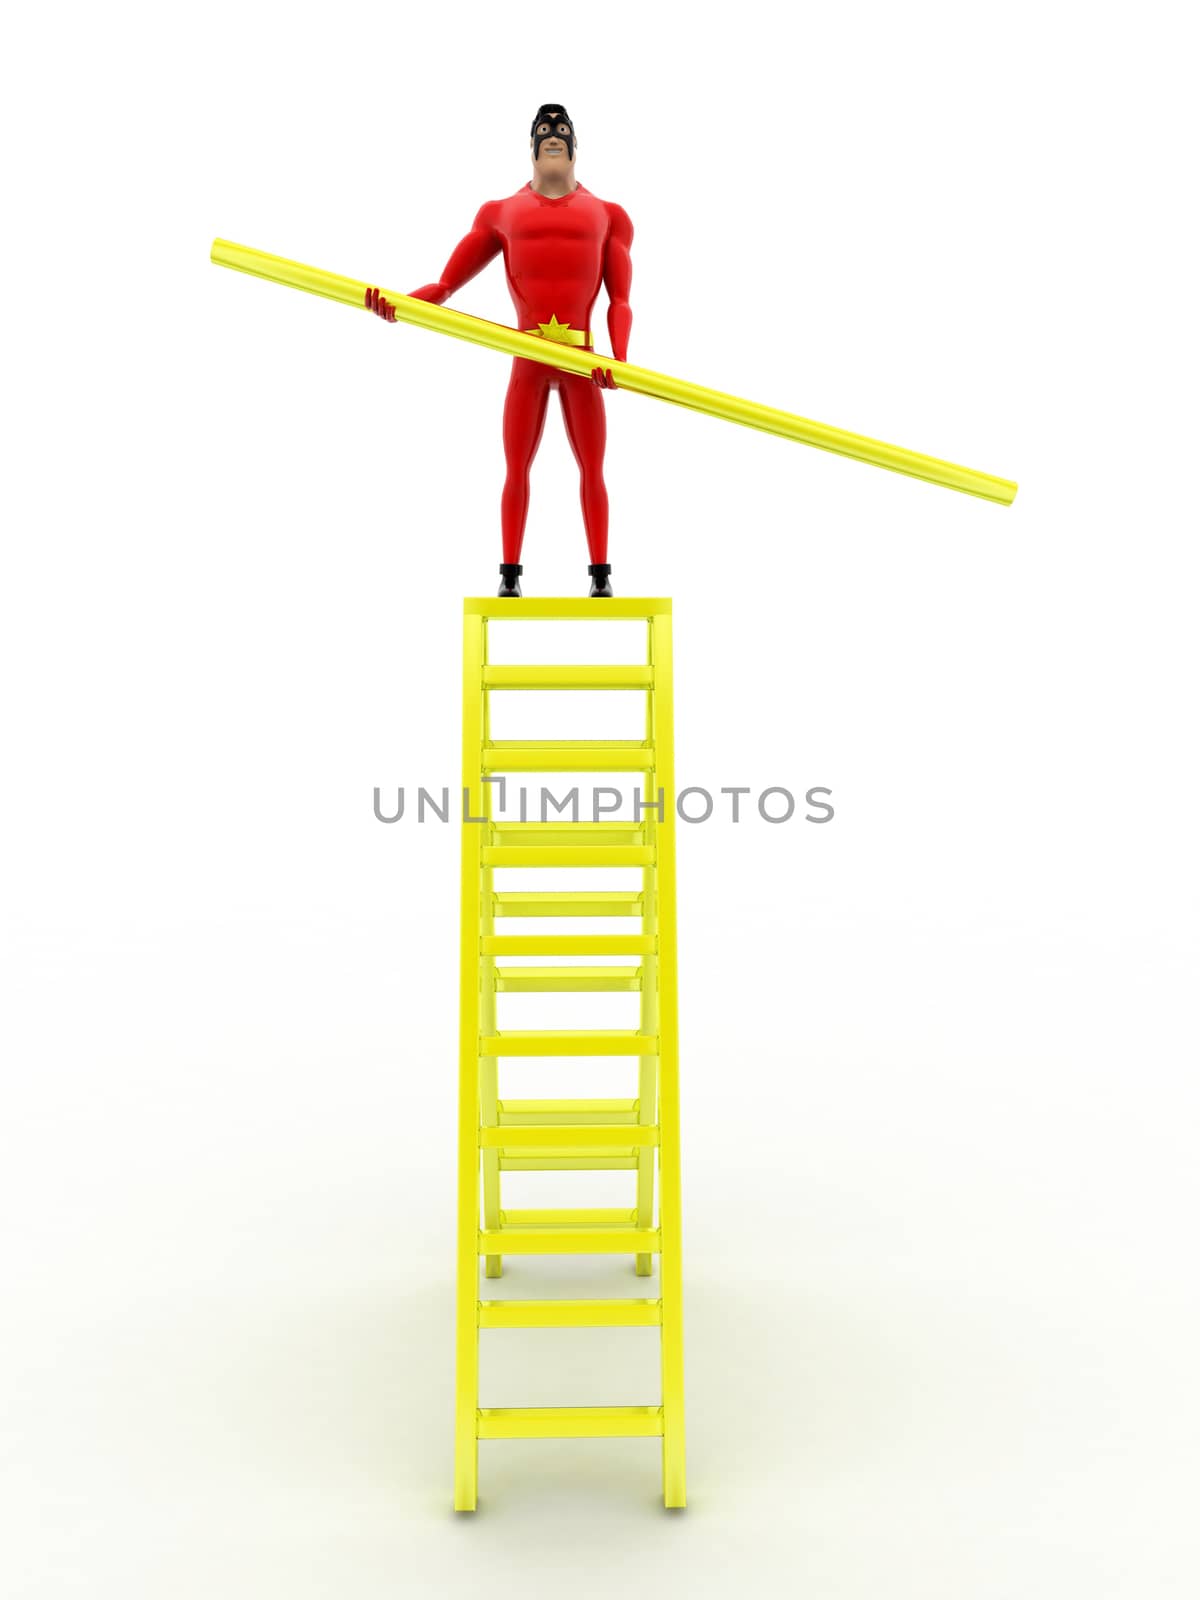 3d superhero  on the top of golden stairs holding a golden rod c by touchmenithin@gmail.com